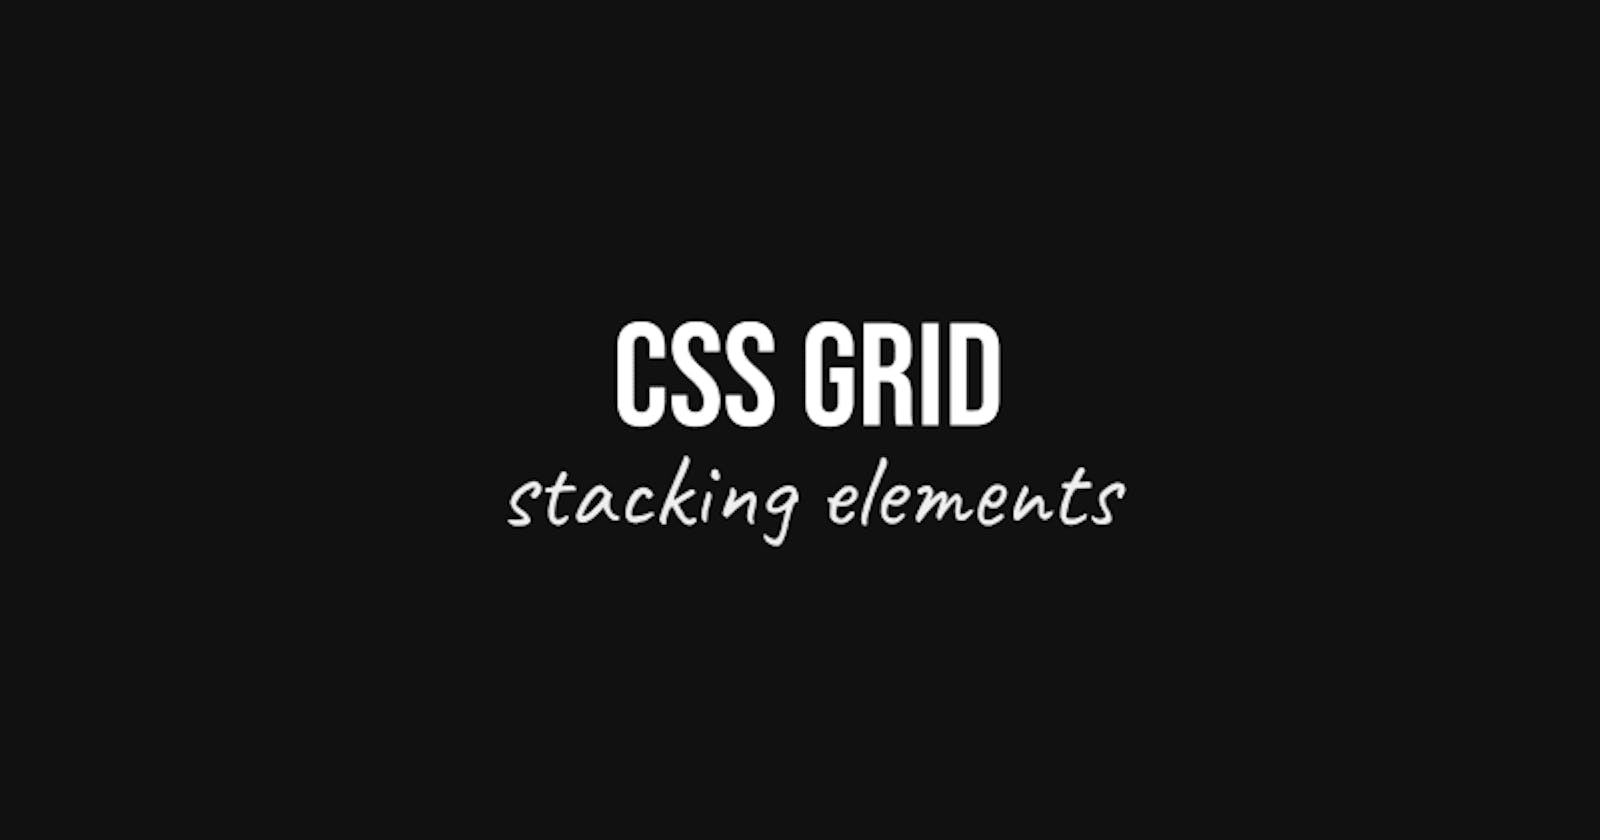 Css Grid: Stacking elements